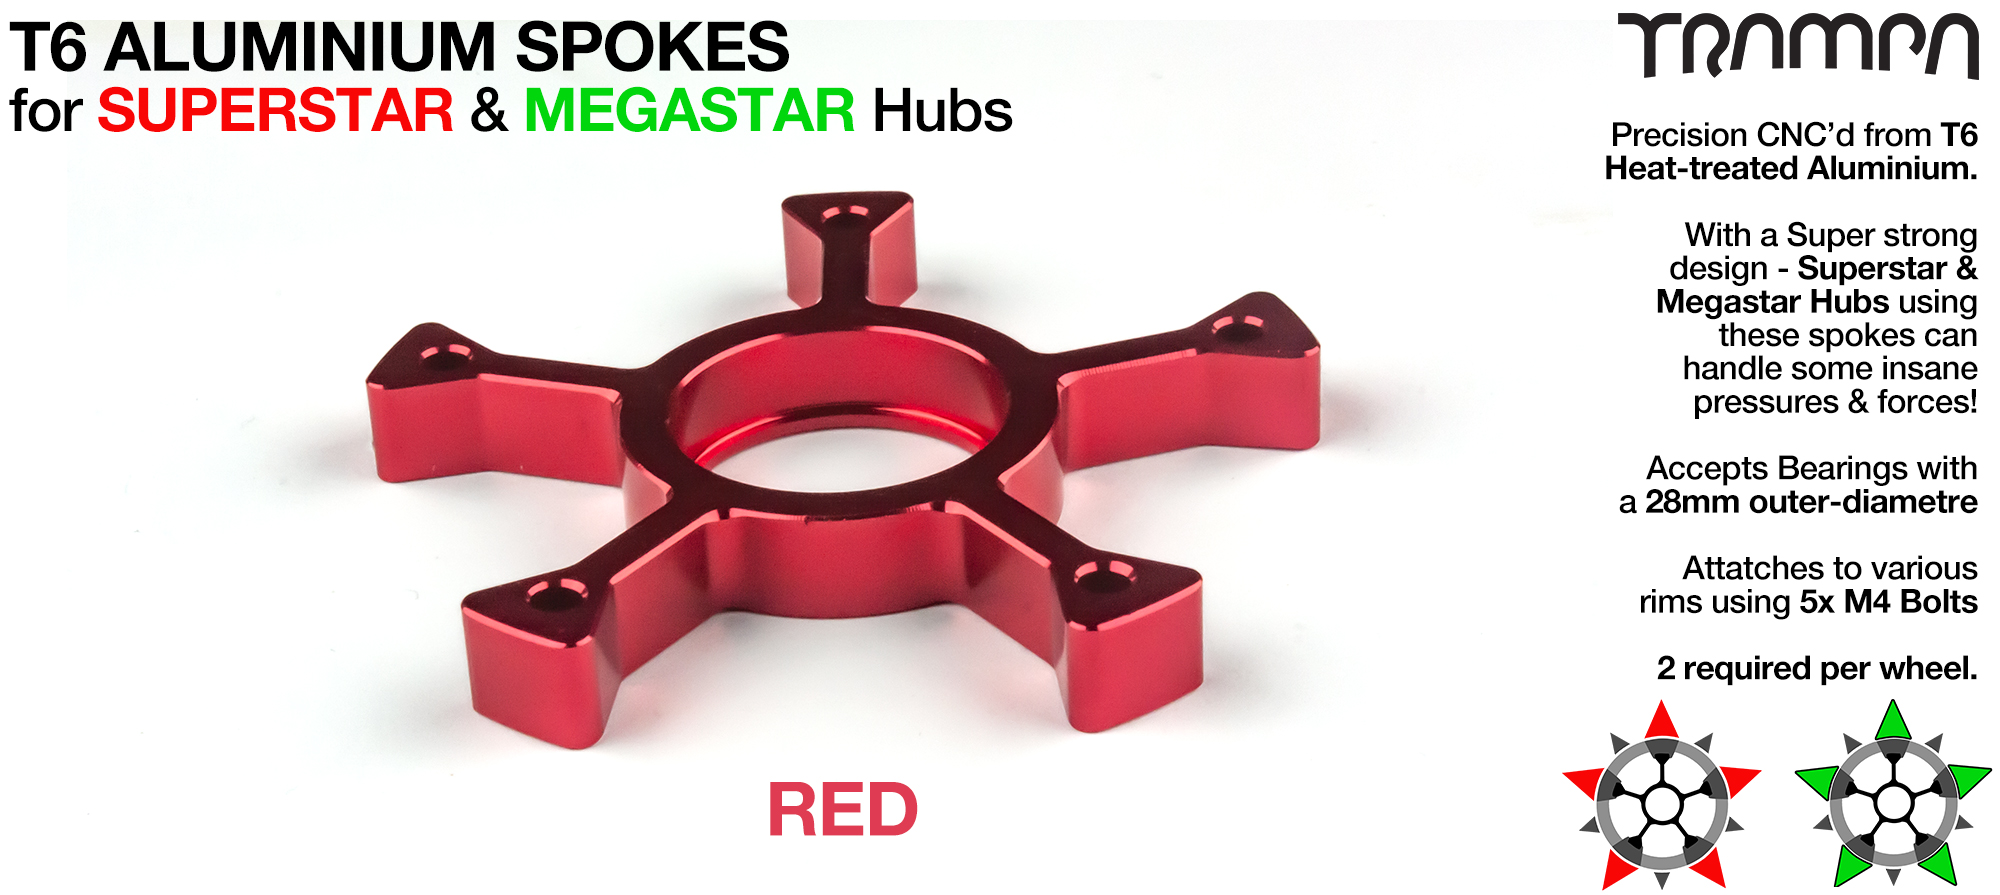 RED Anodised CLASSIC 5 SPOKE - Extruded T6 Aluminum Heat treated & CNC Precision milled fits all SUPERSTAR & MEGASTAR Wheels